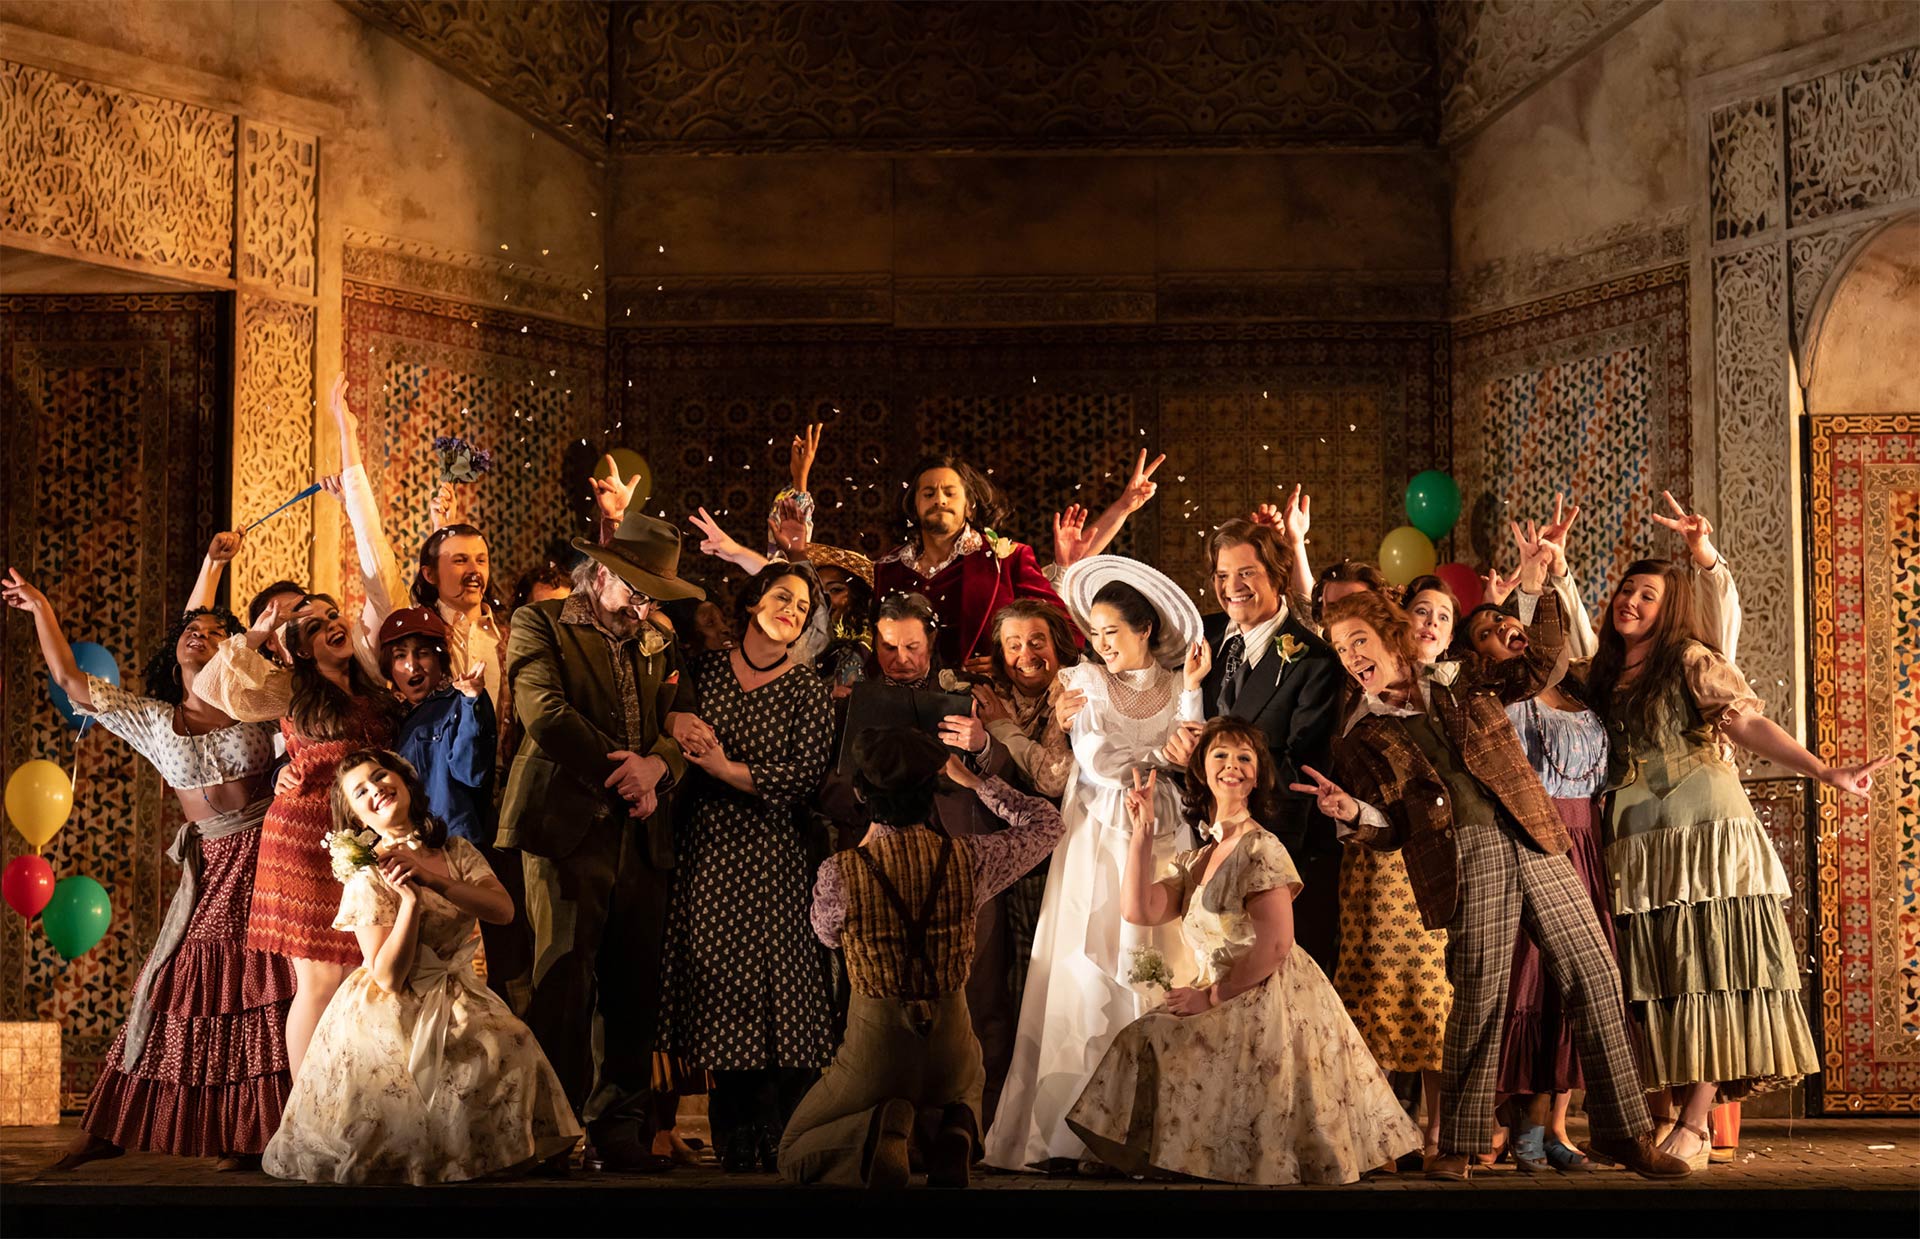 An unforgettable musical experience with Glyndebourne